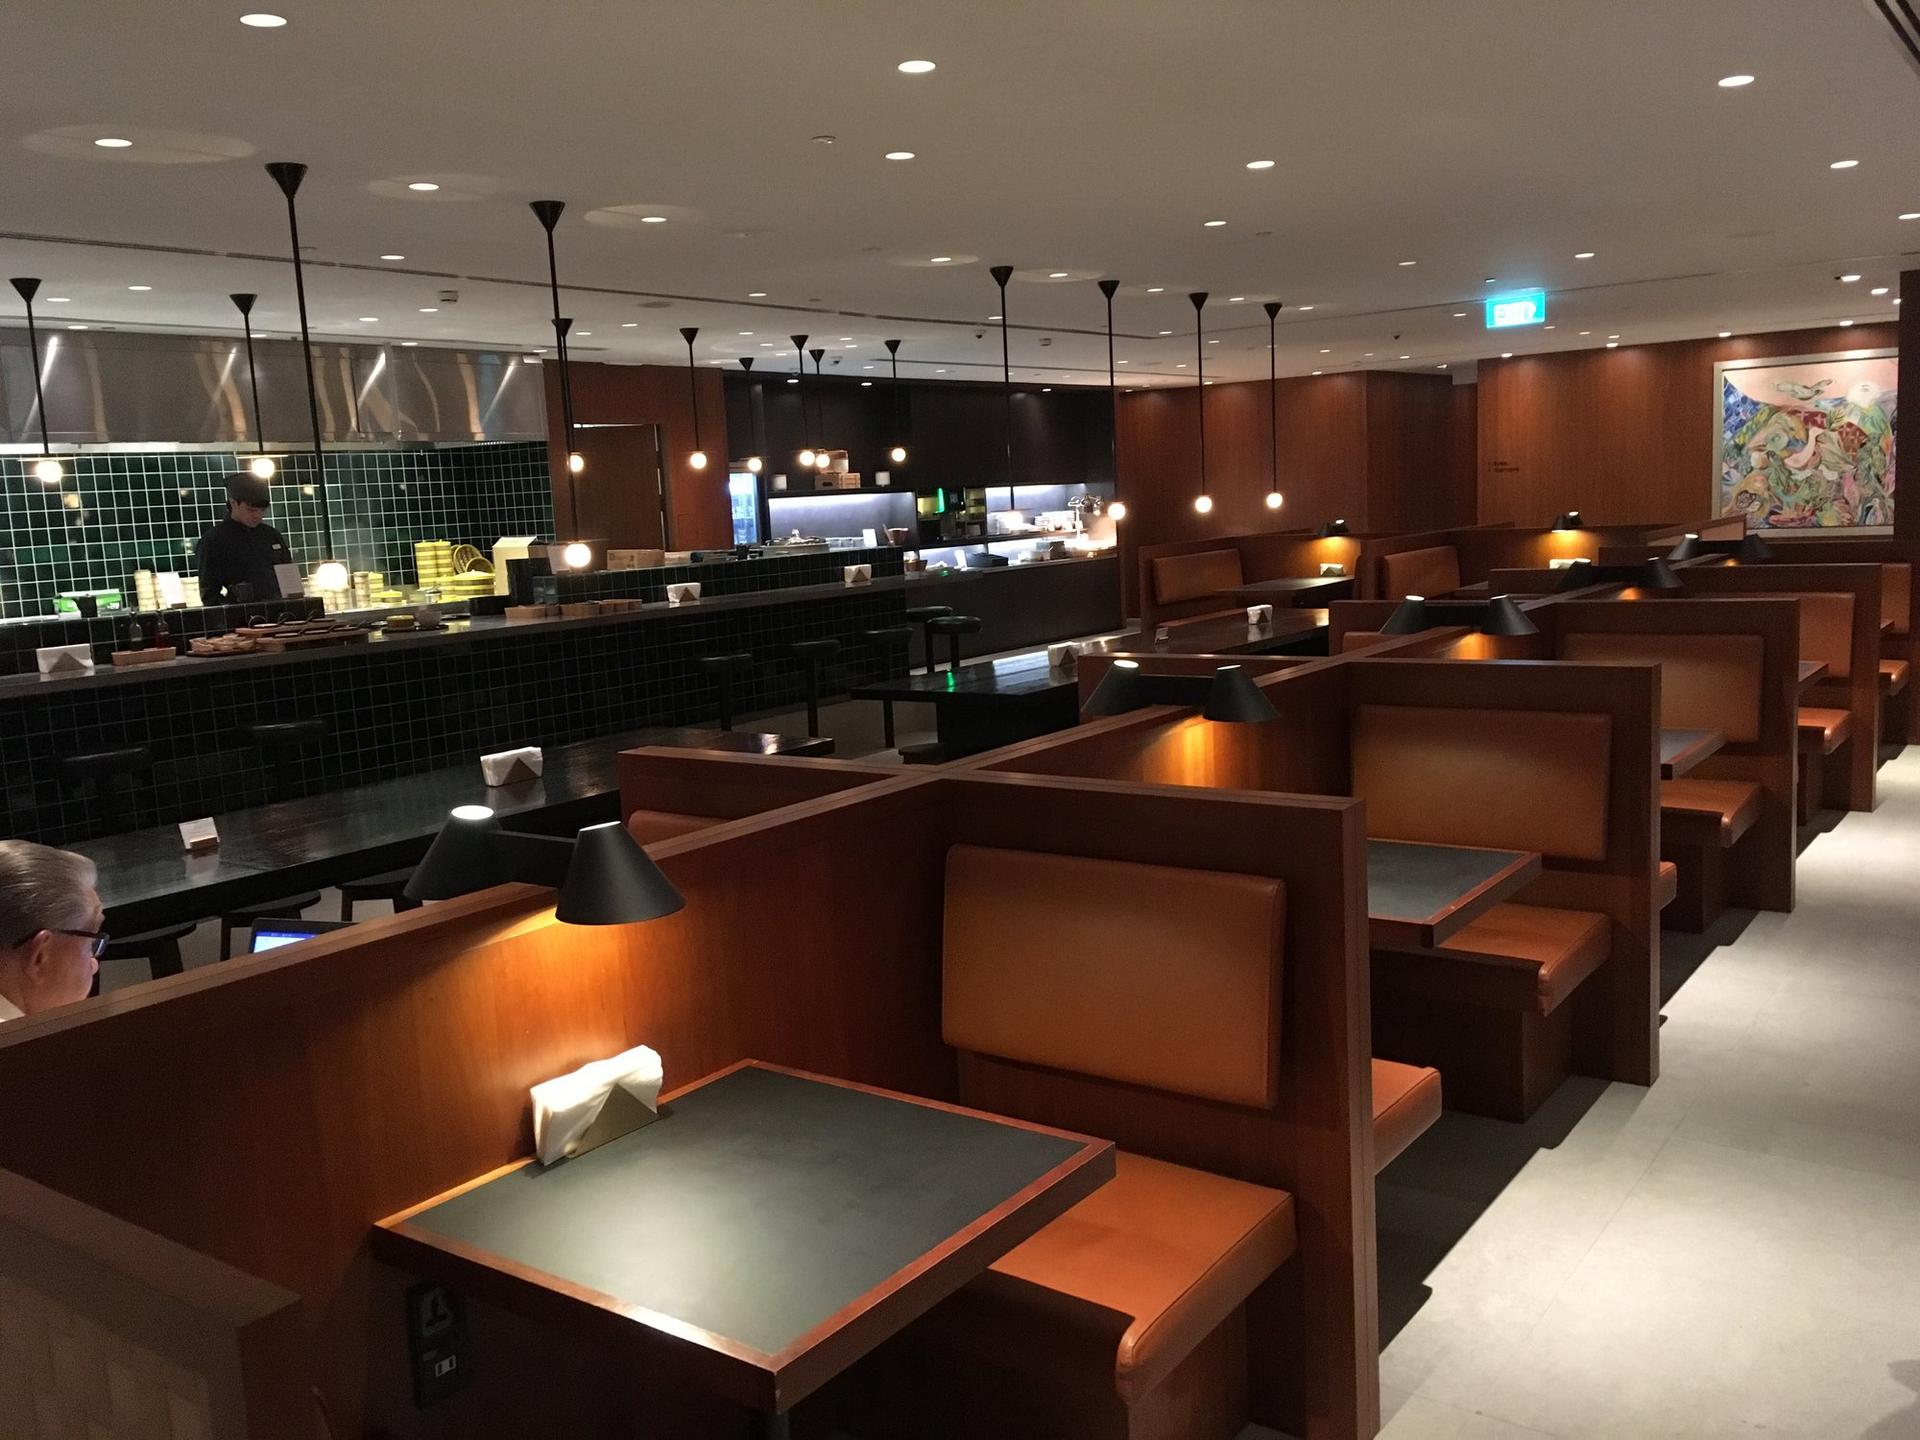 Cathay Pacific Lounge image 44 of 60